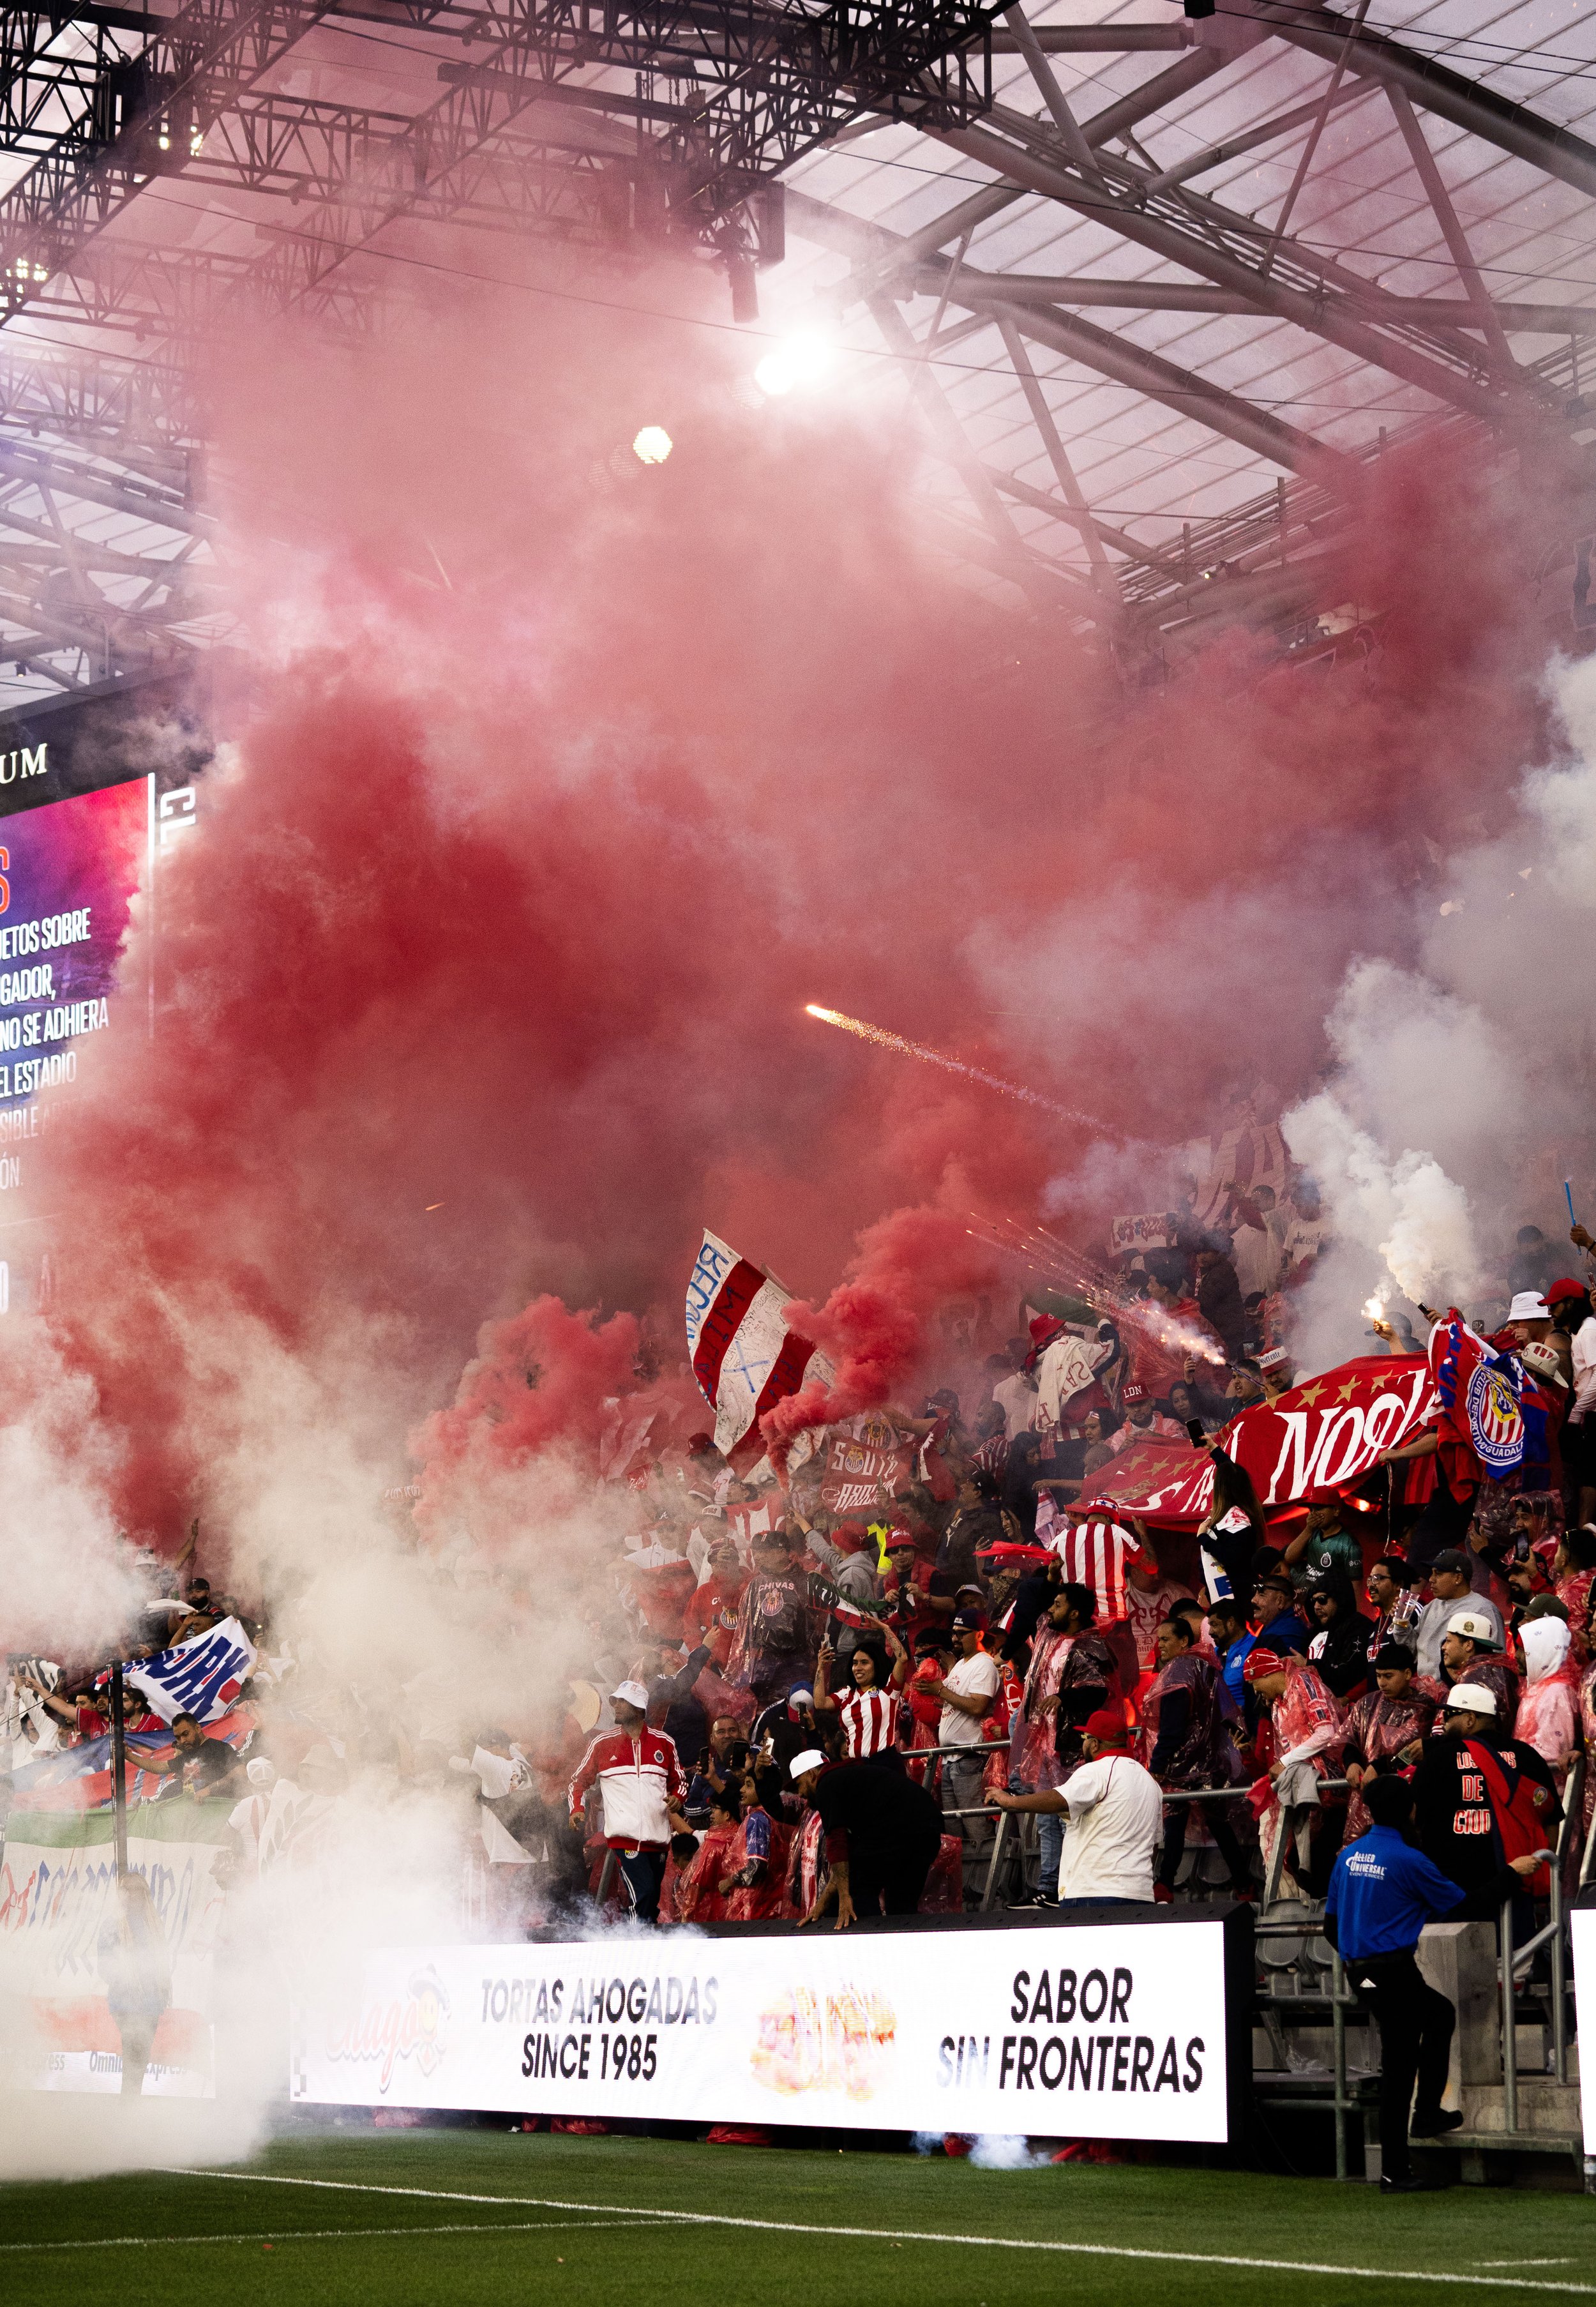  Chiva fans shoot Roman Candles and pop open smoke canisters before the end of the Chiva-Atlas game that ended in a scoreless tie on Sunday, March 24 in BMO Stadium at Los Angeles, Calif. (Danilo Perez | The Corsair) 